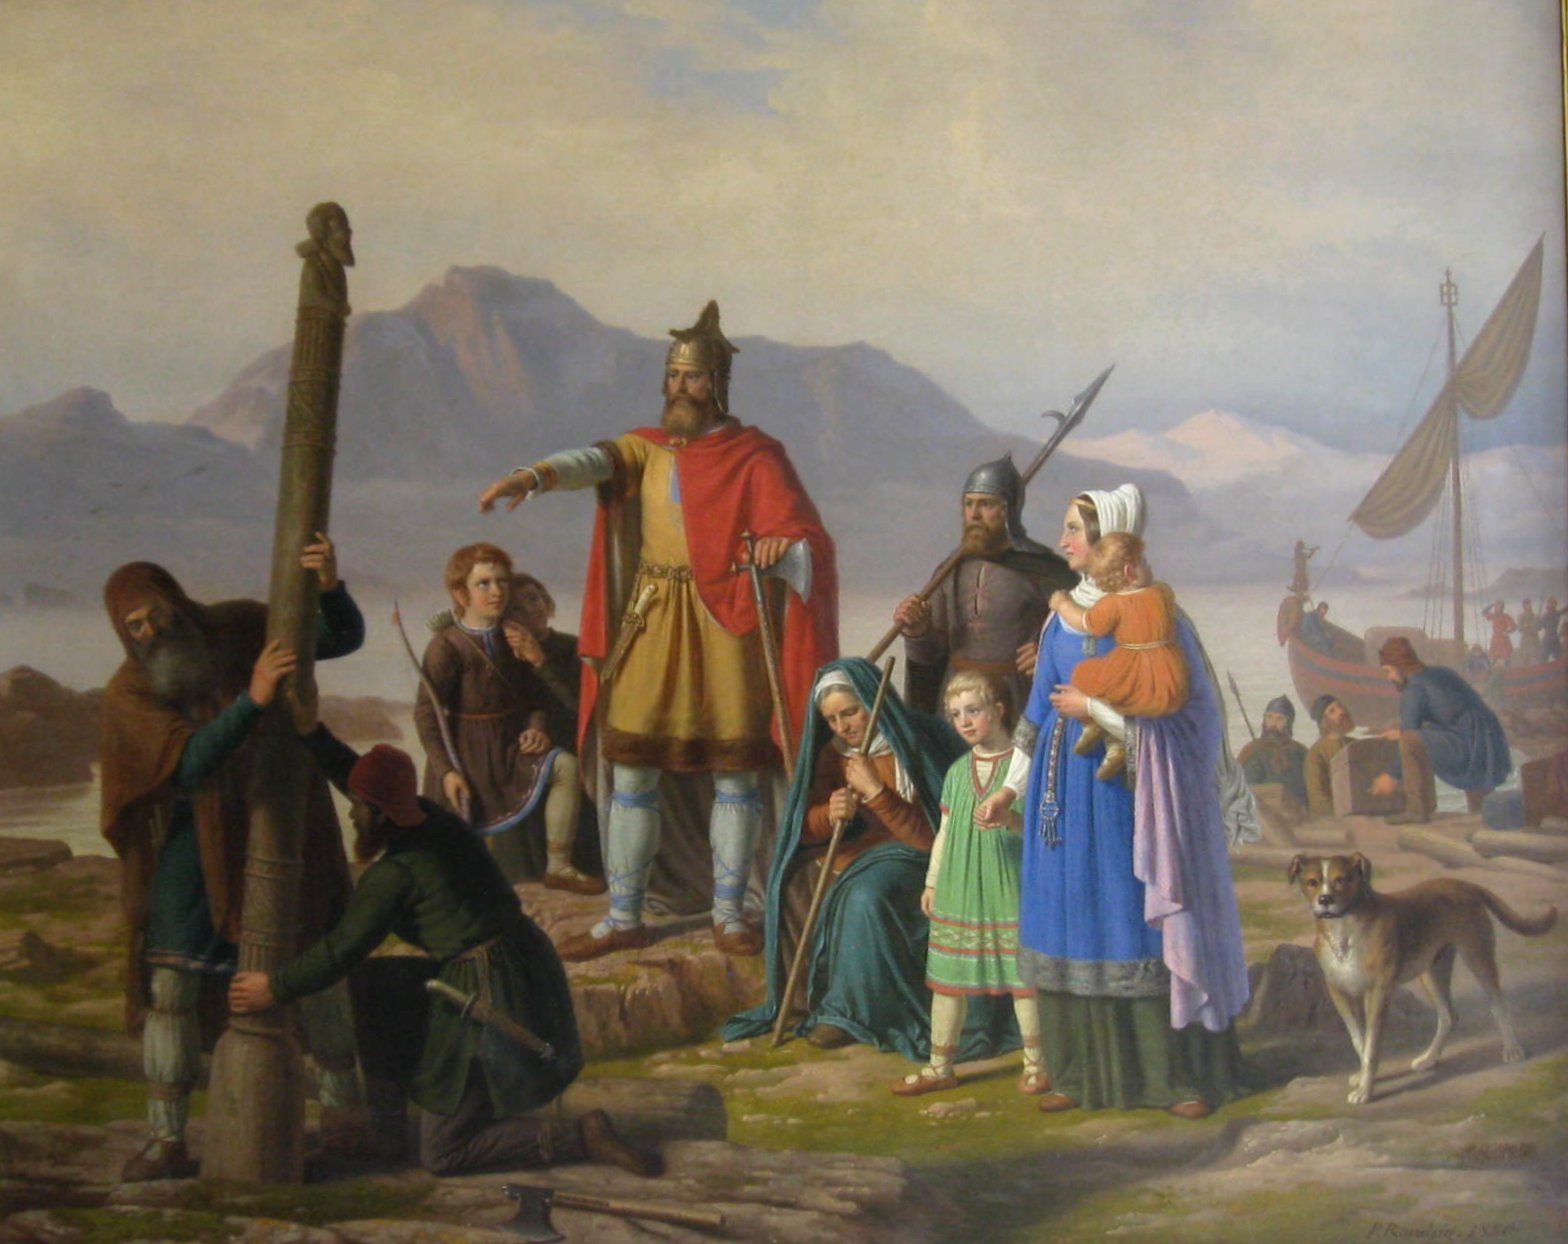 Forget the crisis – Iceland survived 500 years of Danish rule